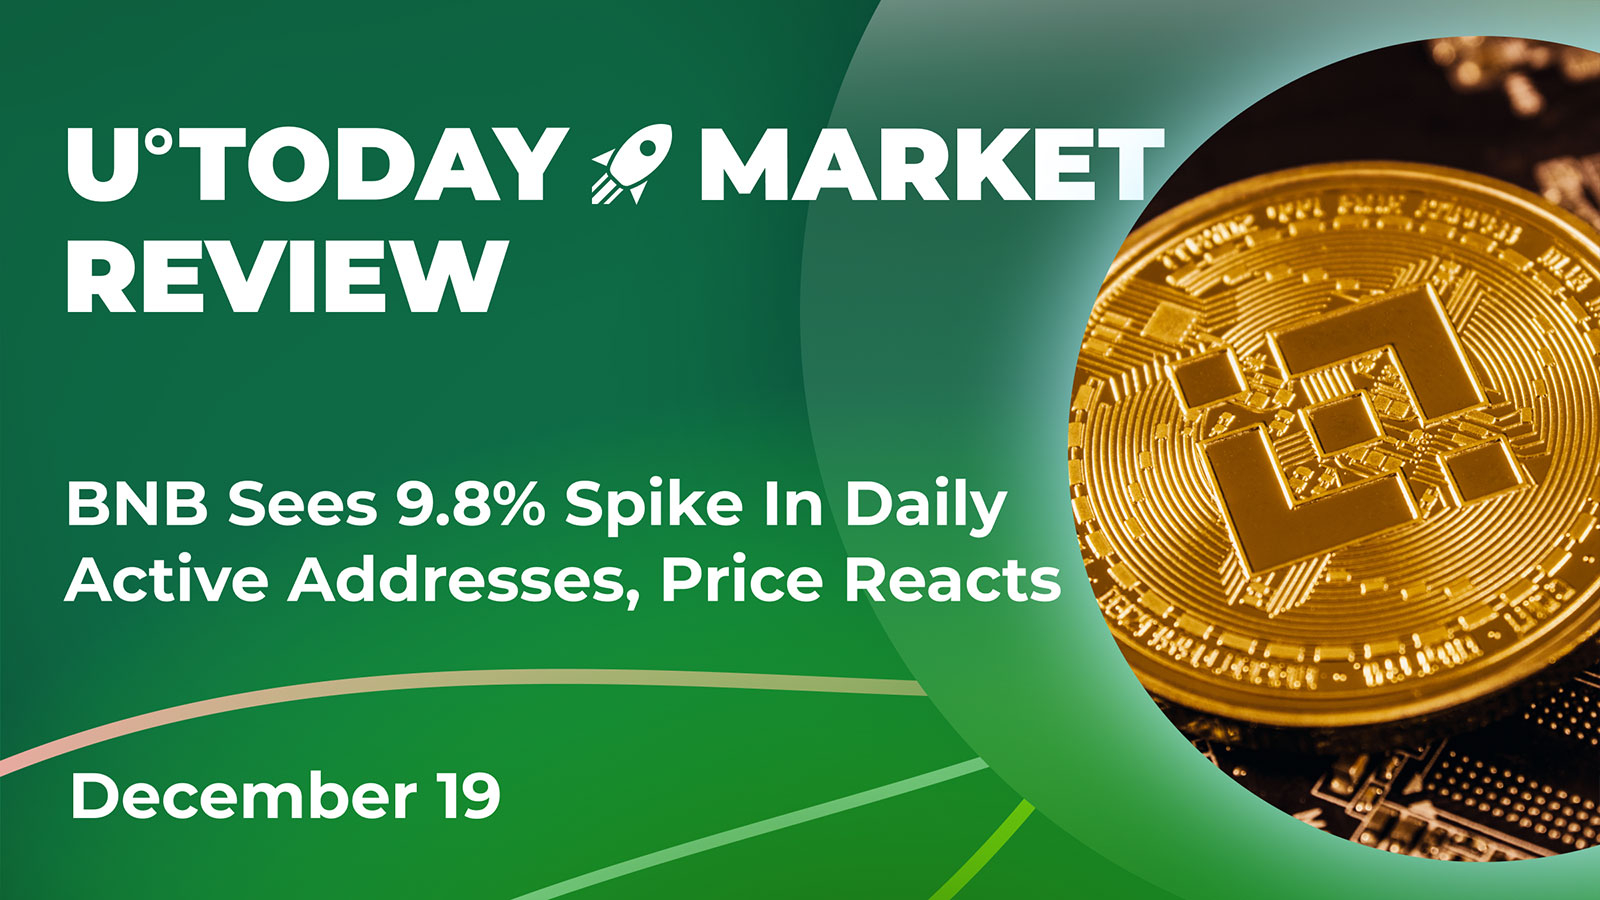 BNB Sees 9.8% Spike in Daily Active Addresses, Price Reacts: Crypto Market Review, Dec. 19